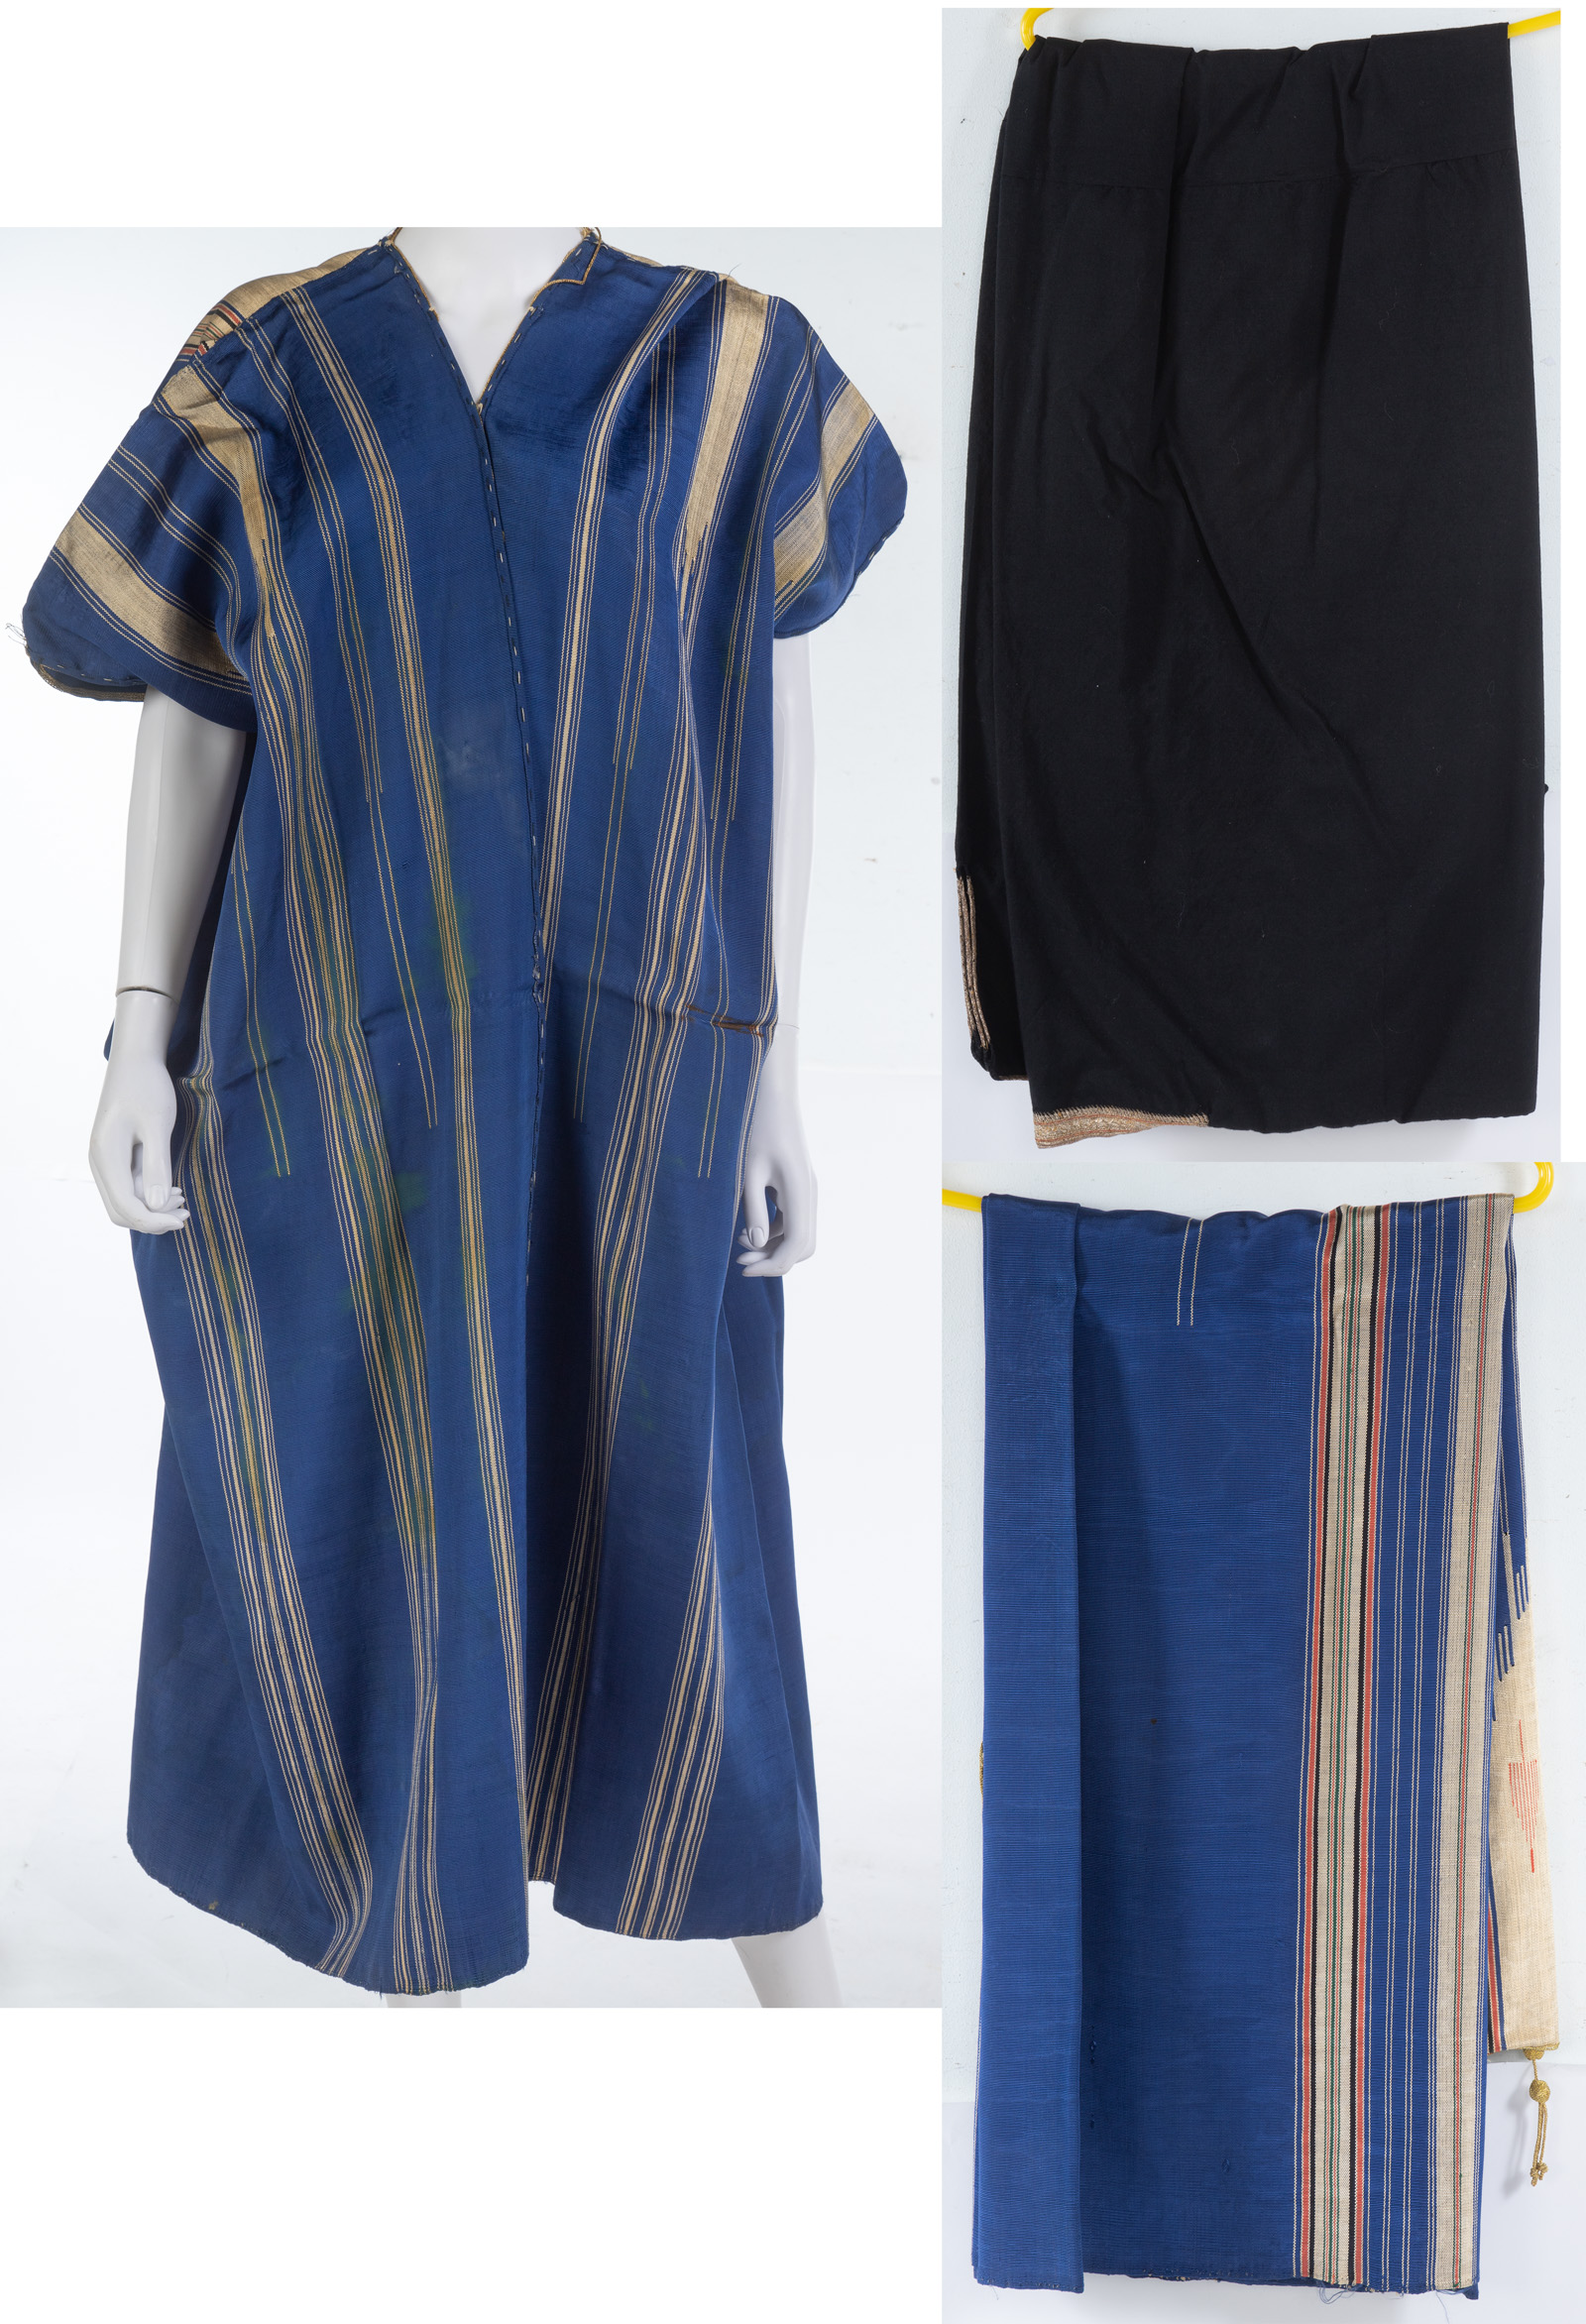 COLLECTION OF ROBES AND WRAPS .